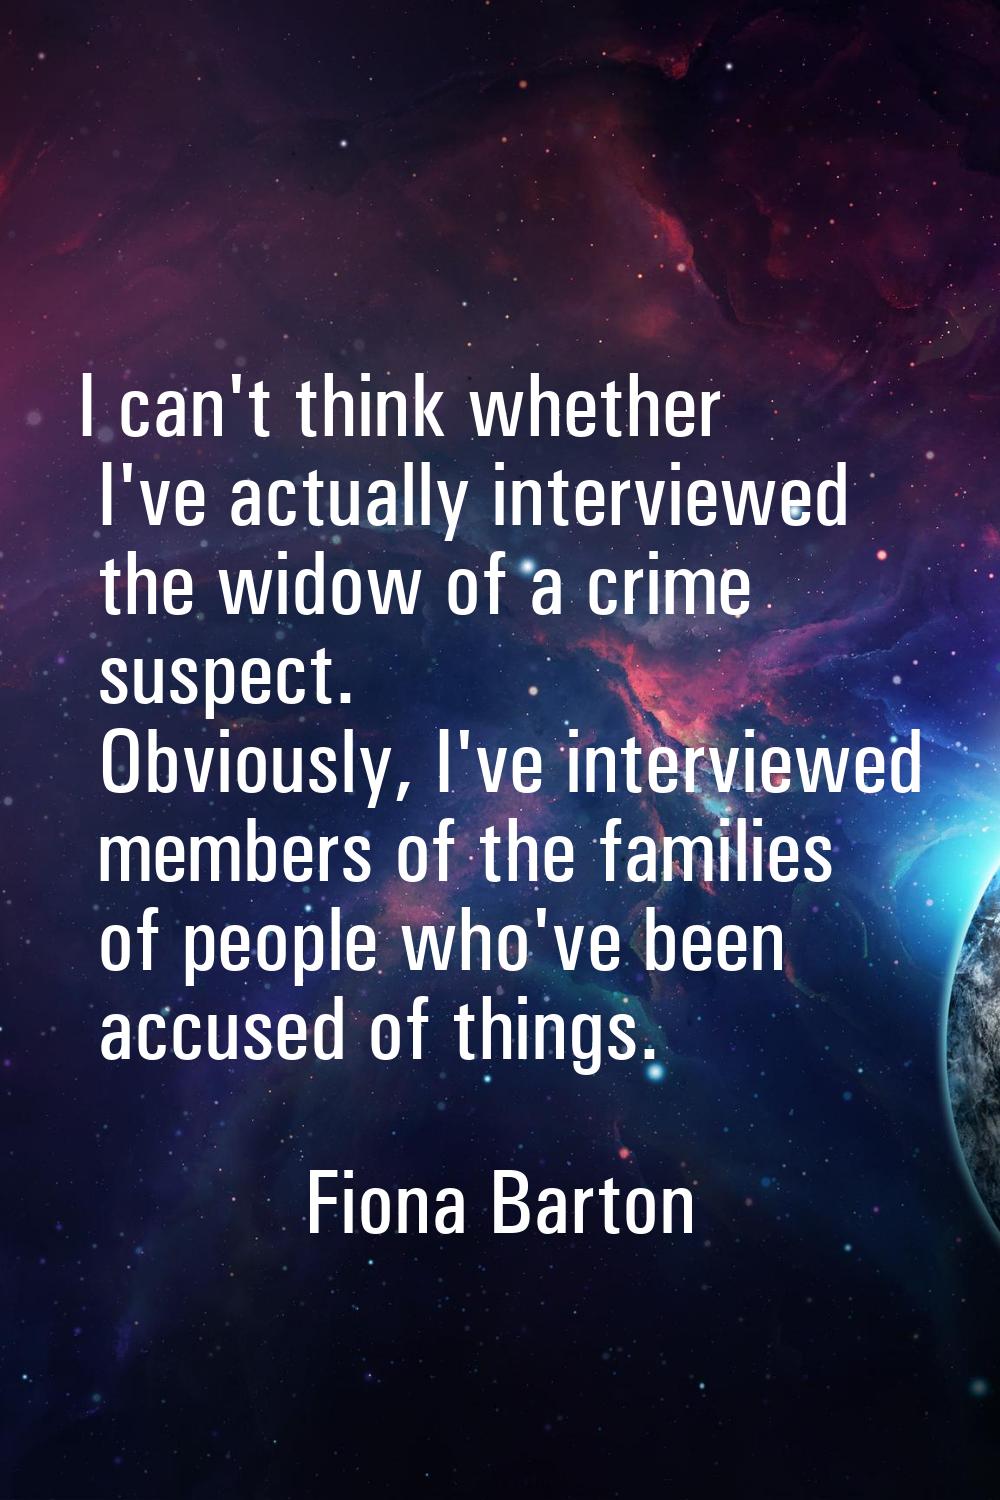 I can't think whether I've actually interviewed the widow of a crime suspect. Obviously, I've inter